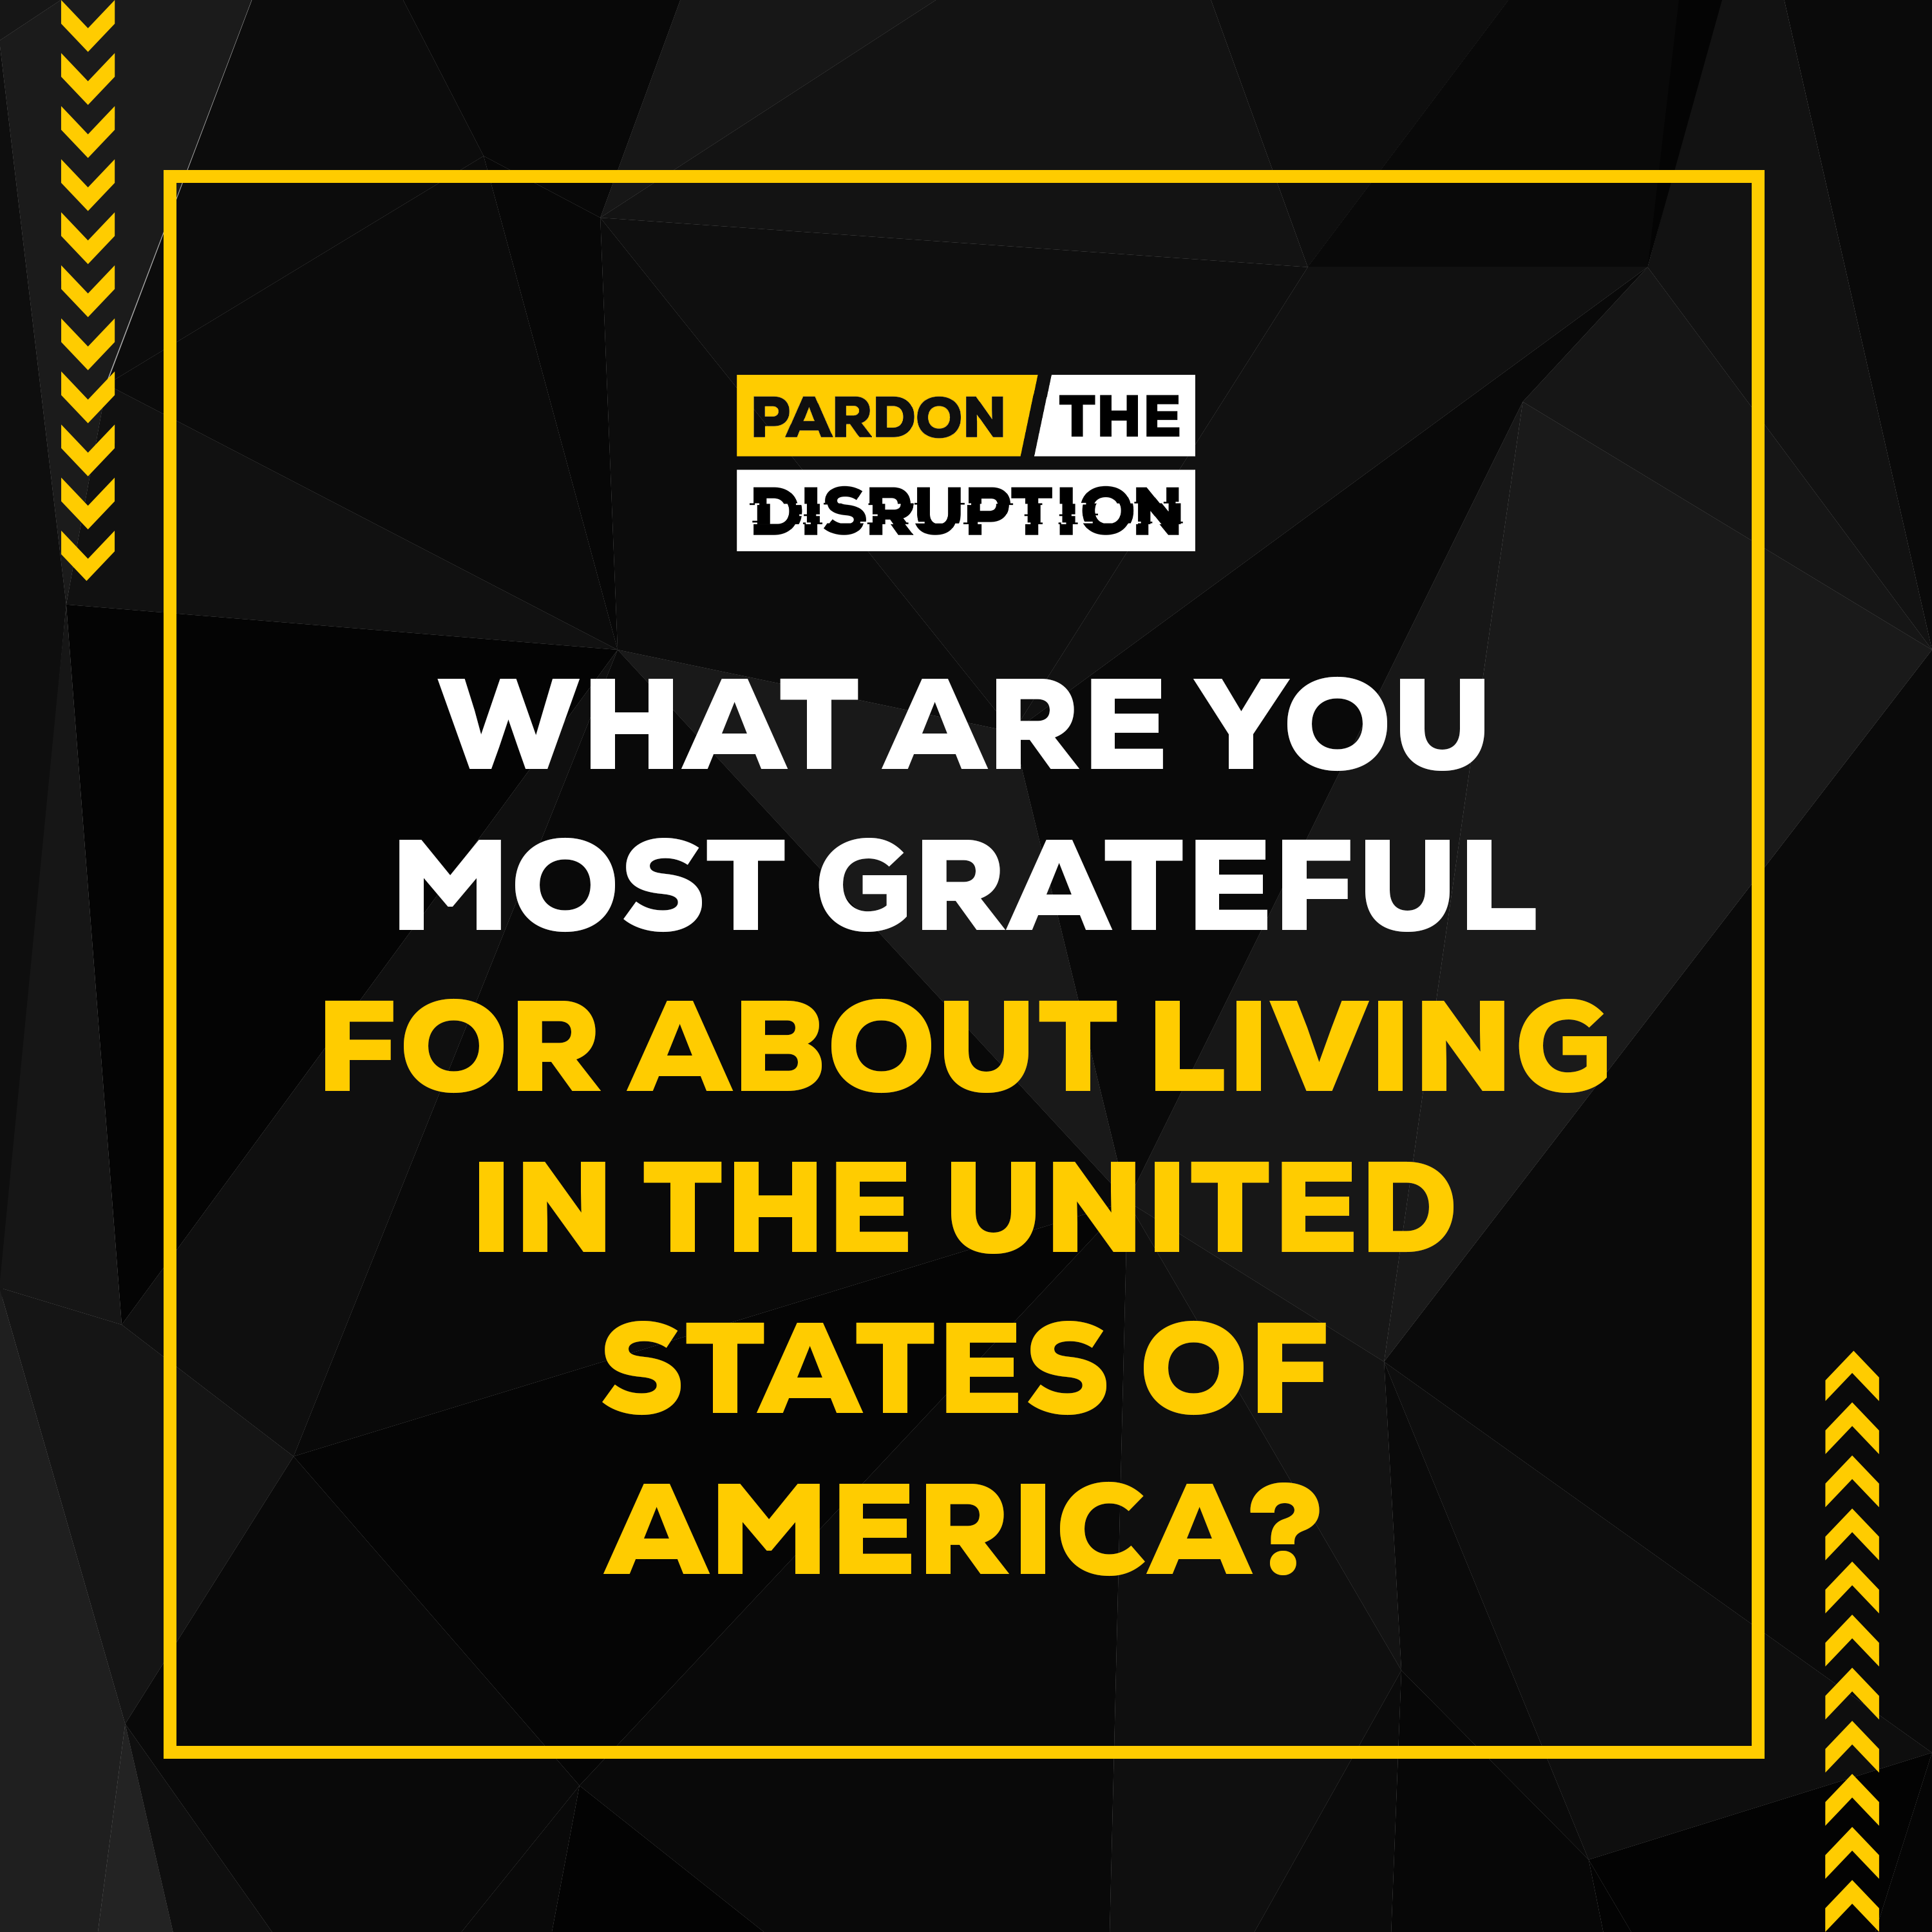 What are you most grateful for about living in the United States of America?